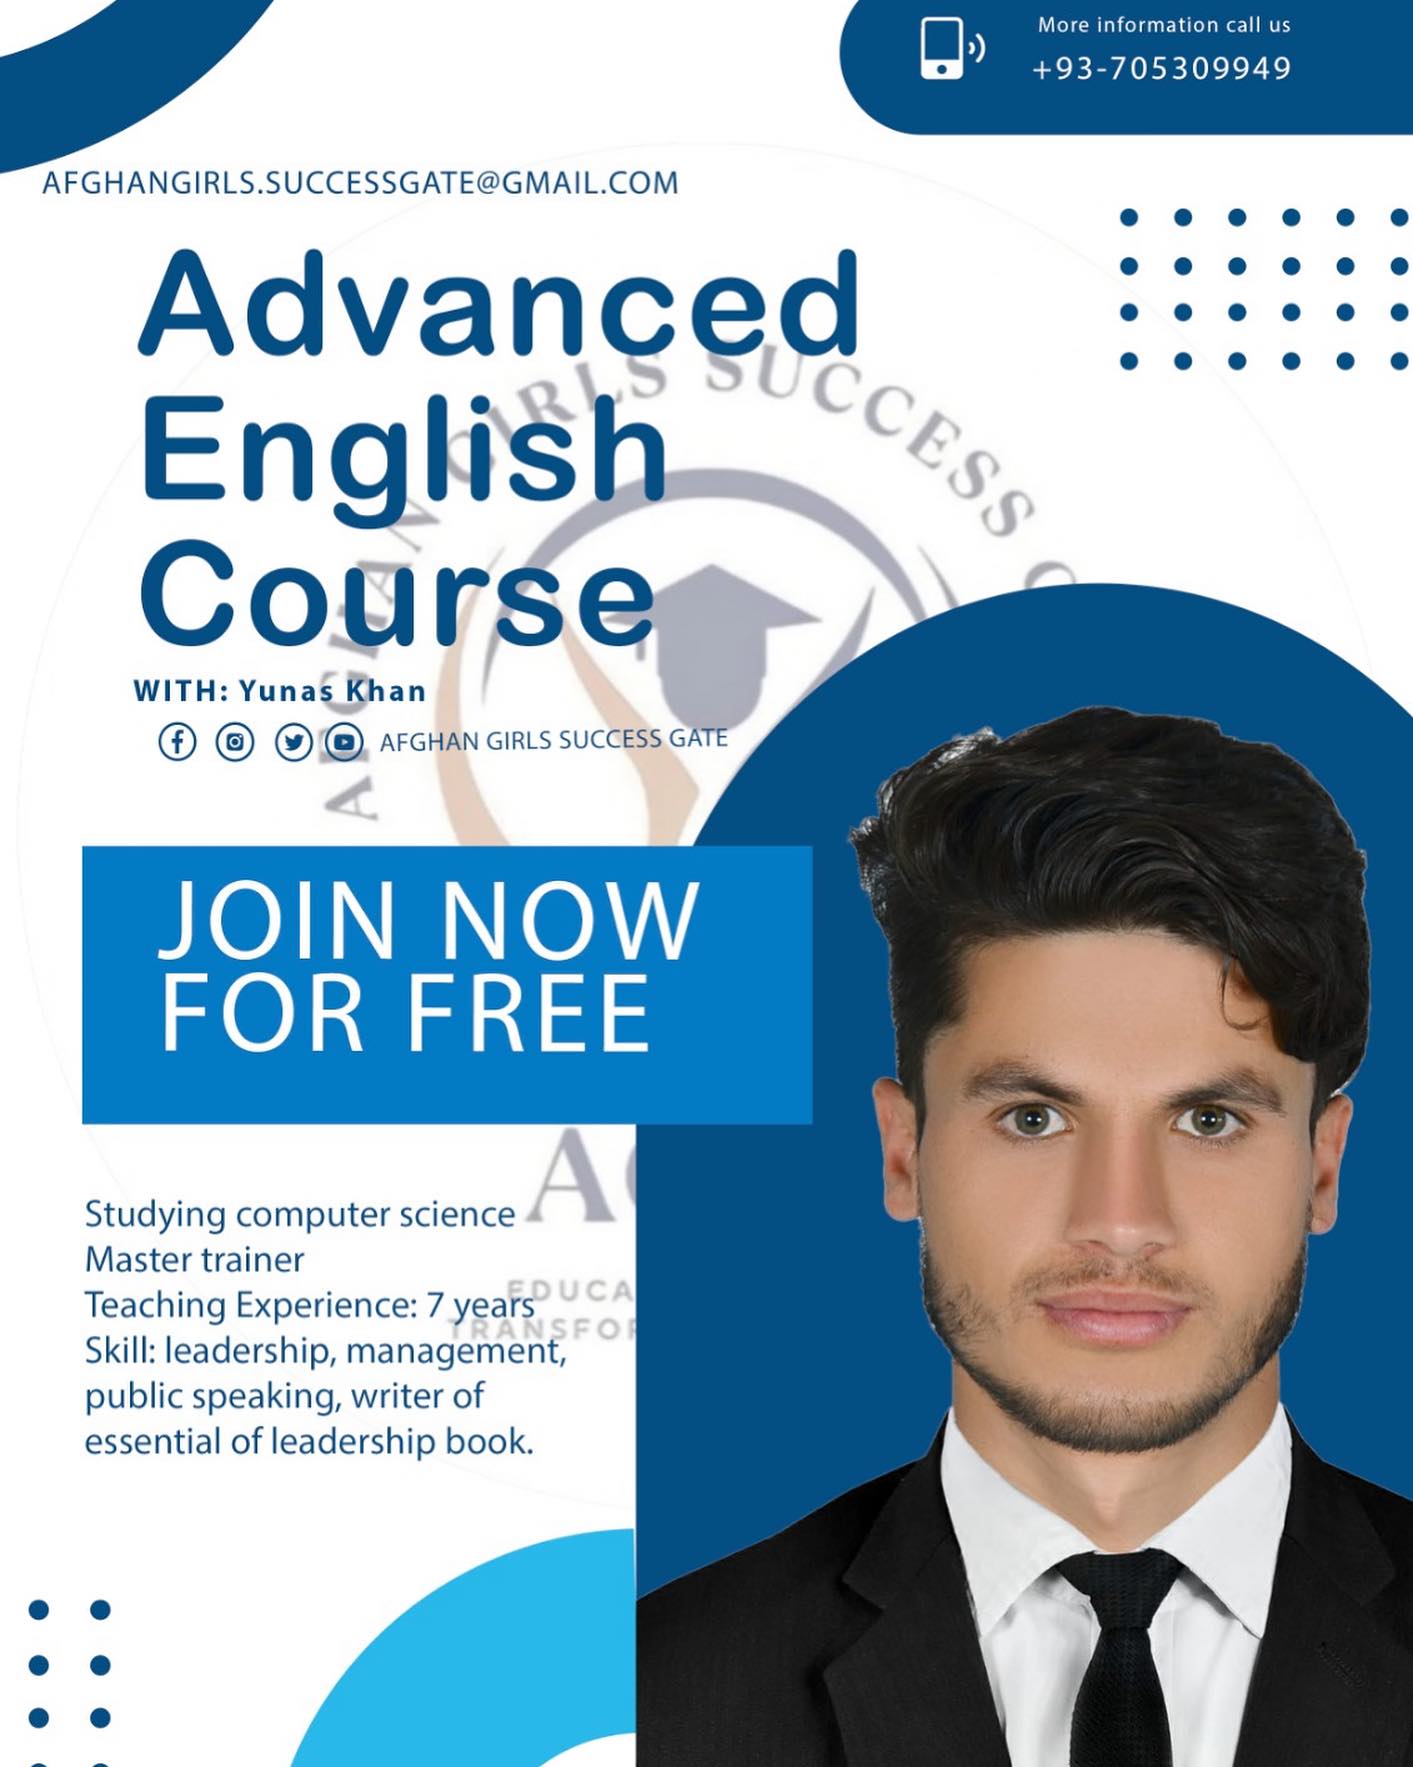 sharepic for advanced english course